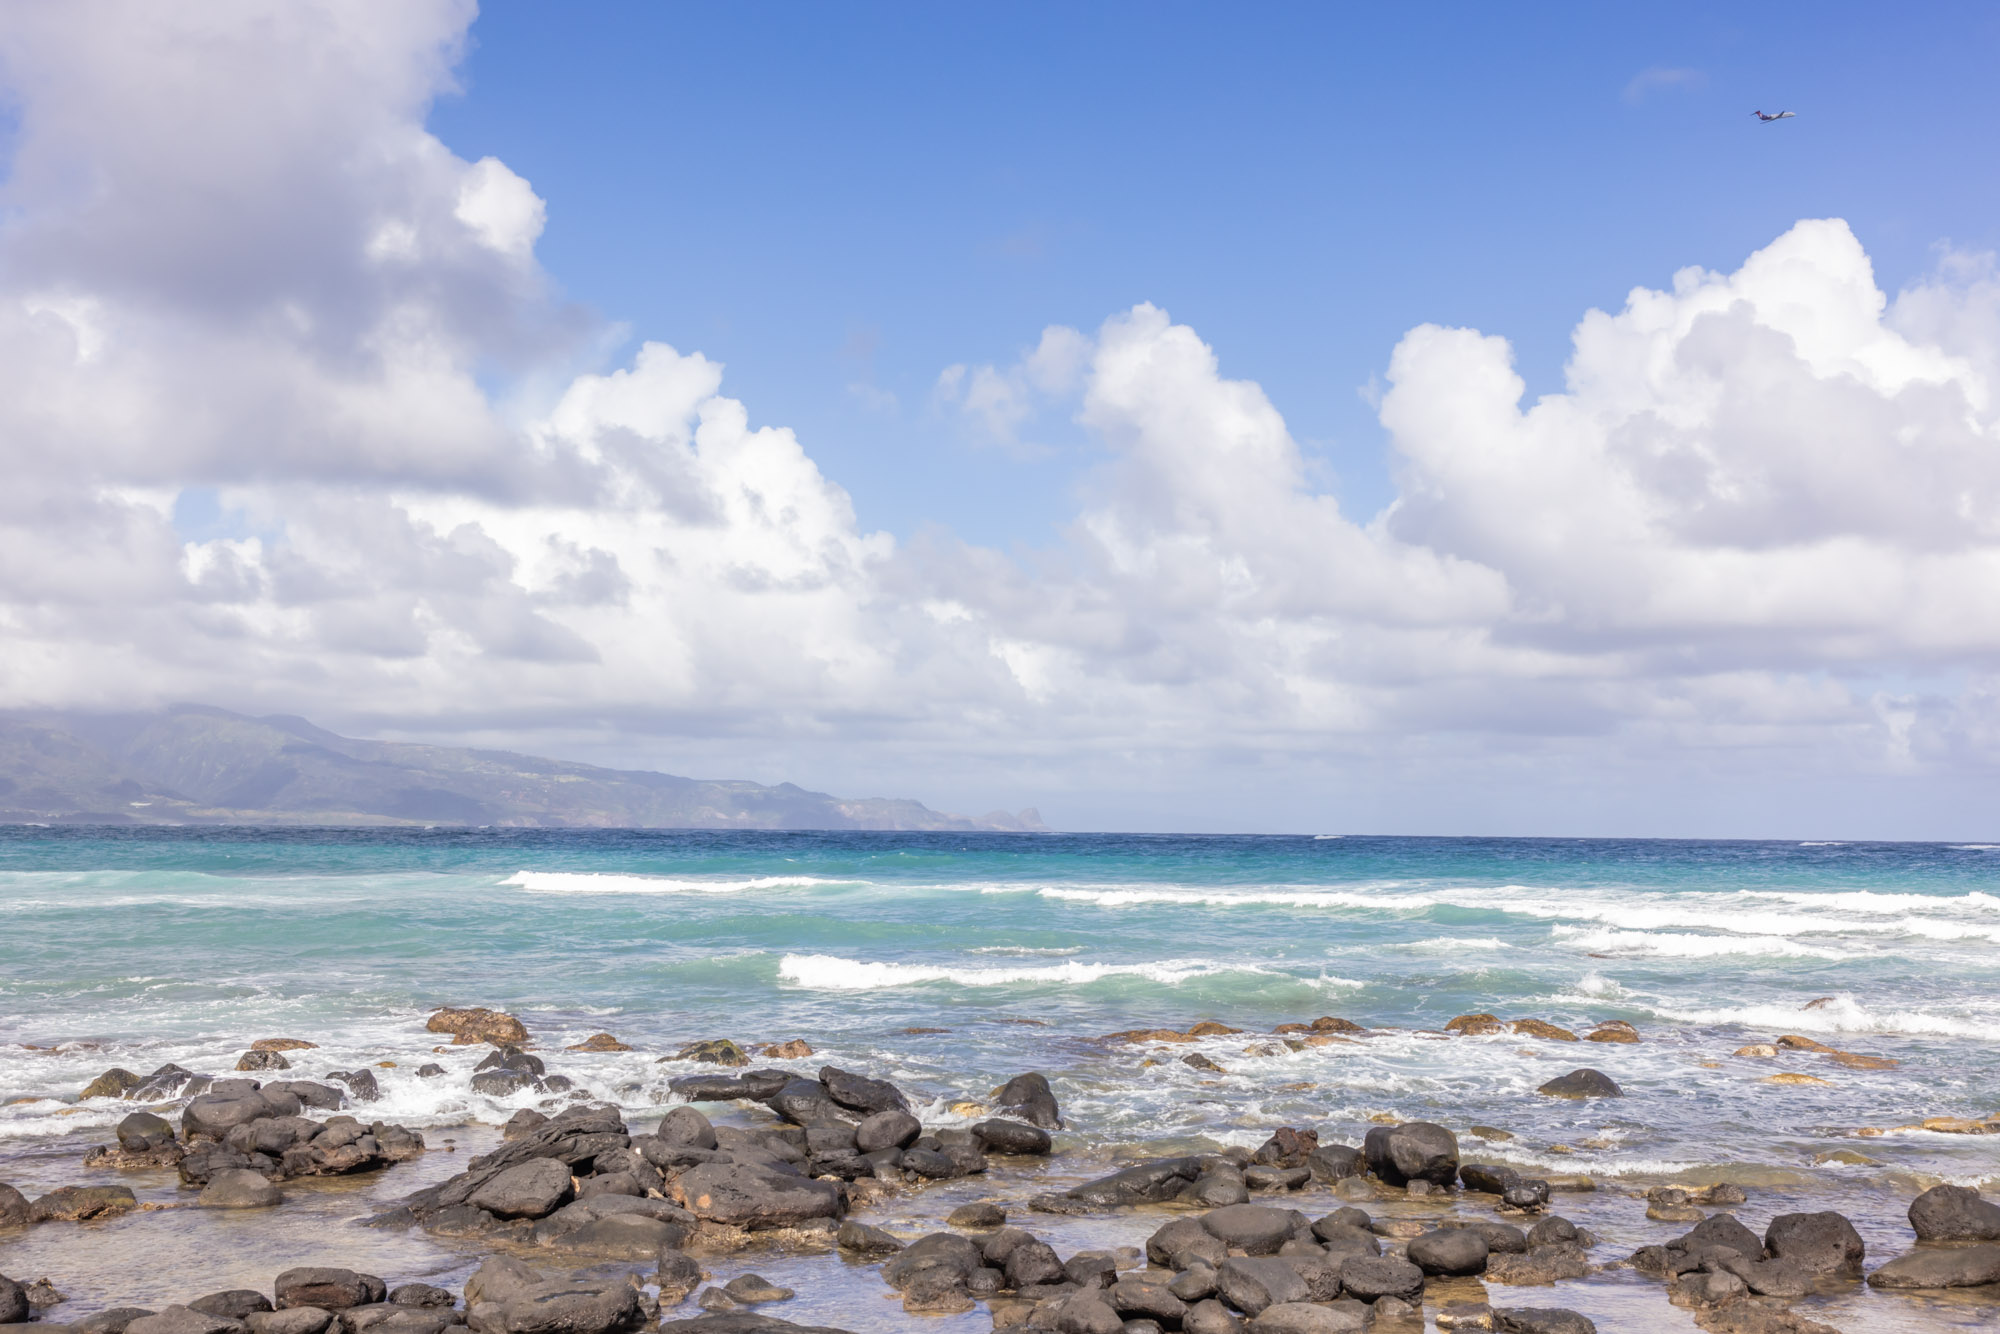 How to see whales in Maui during whale season